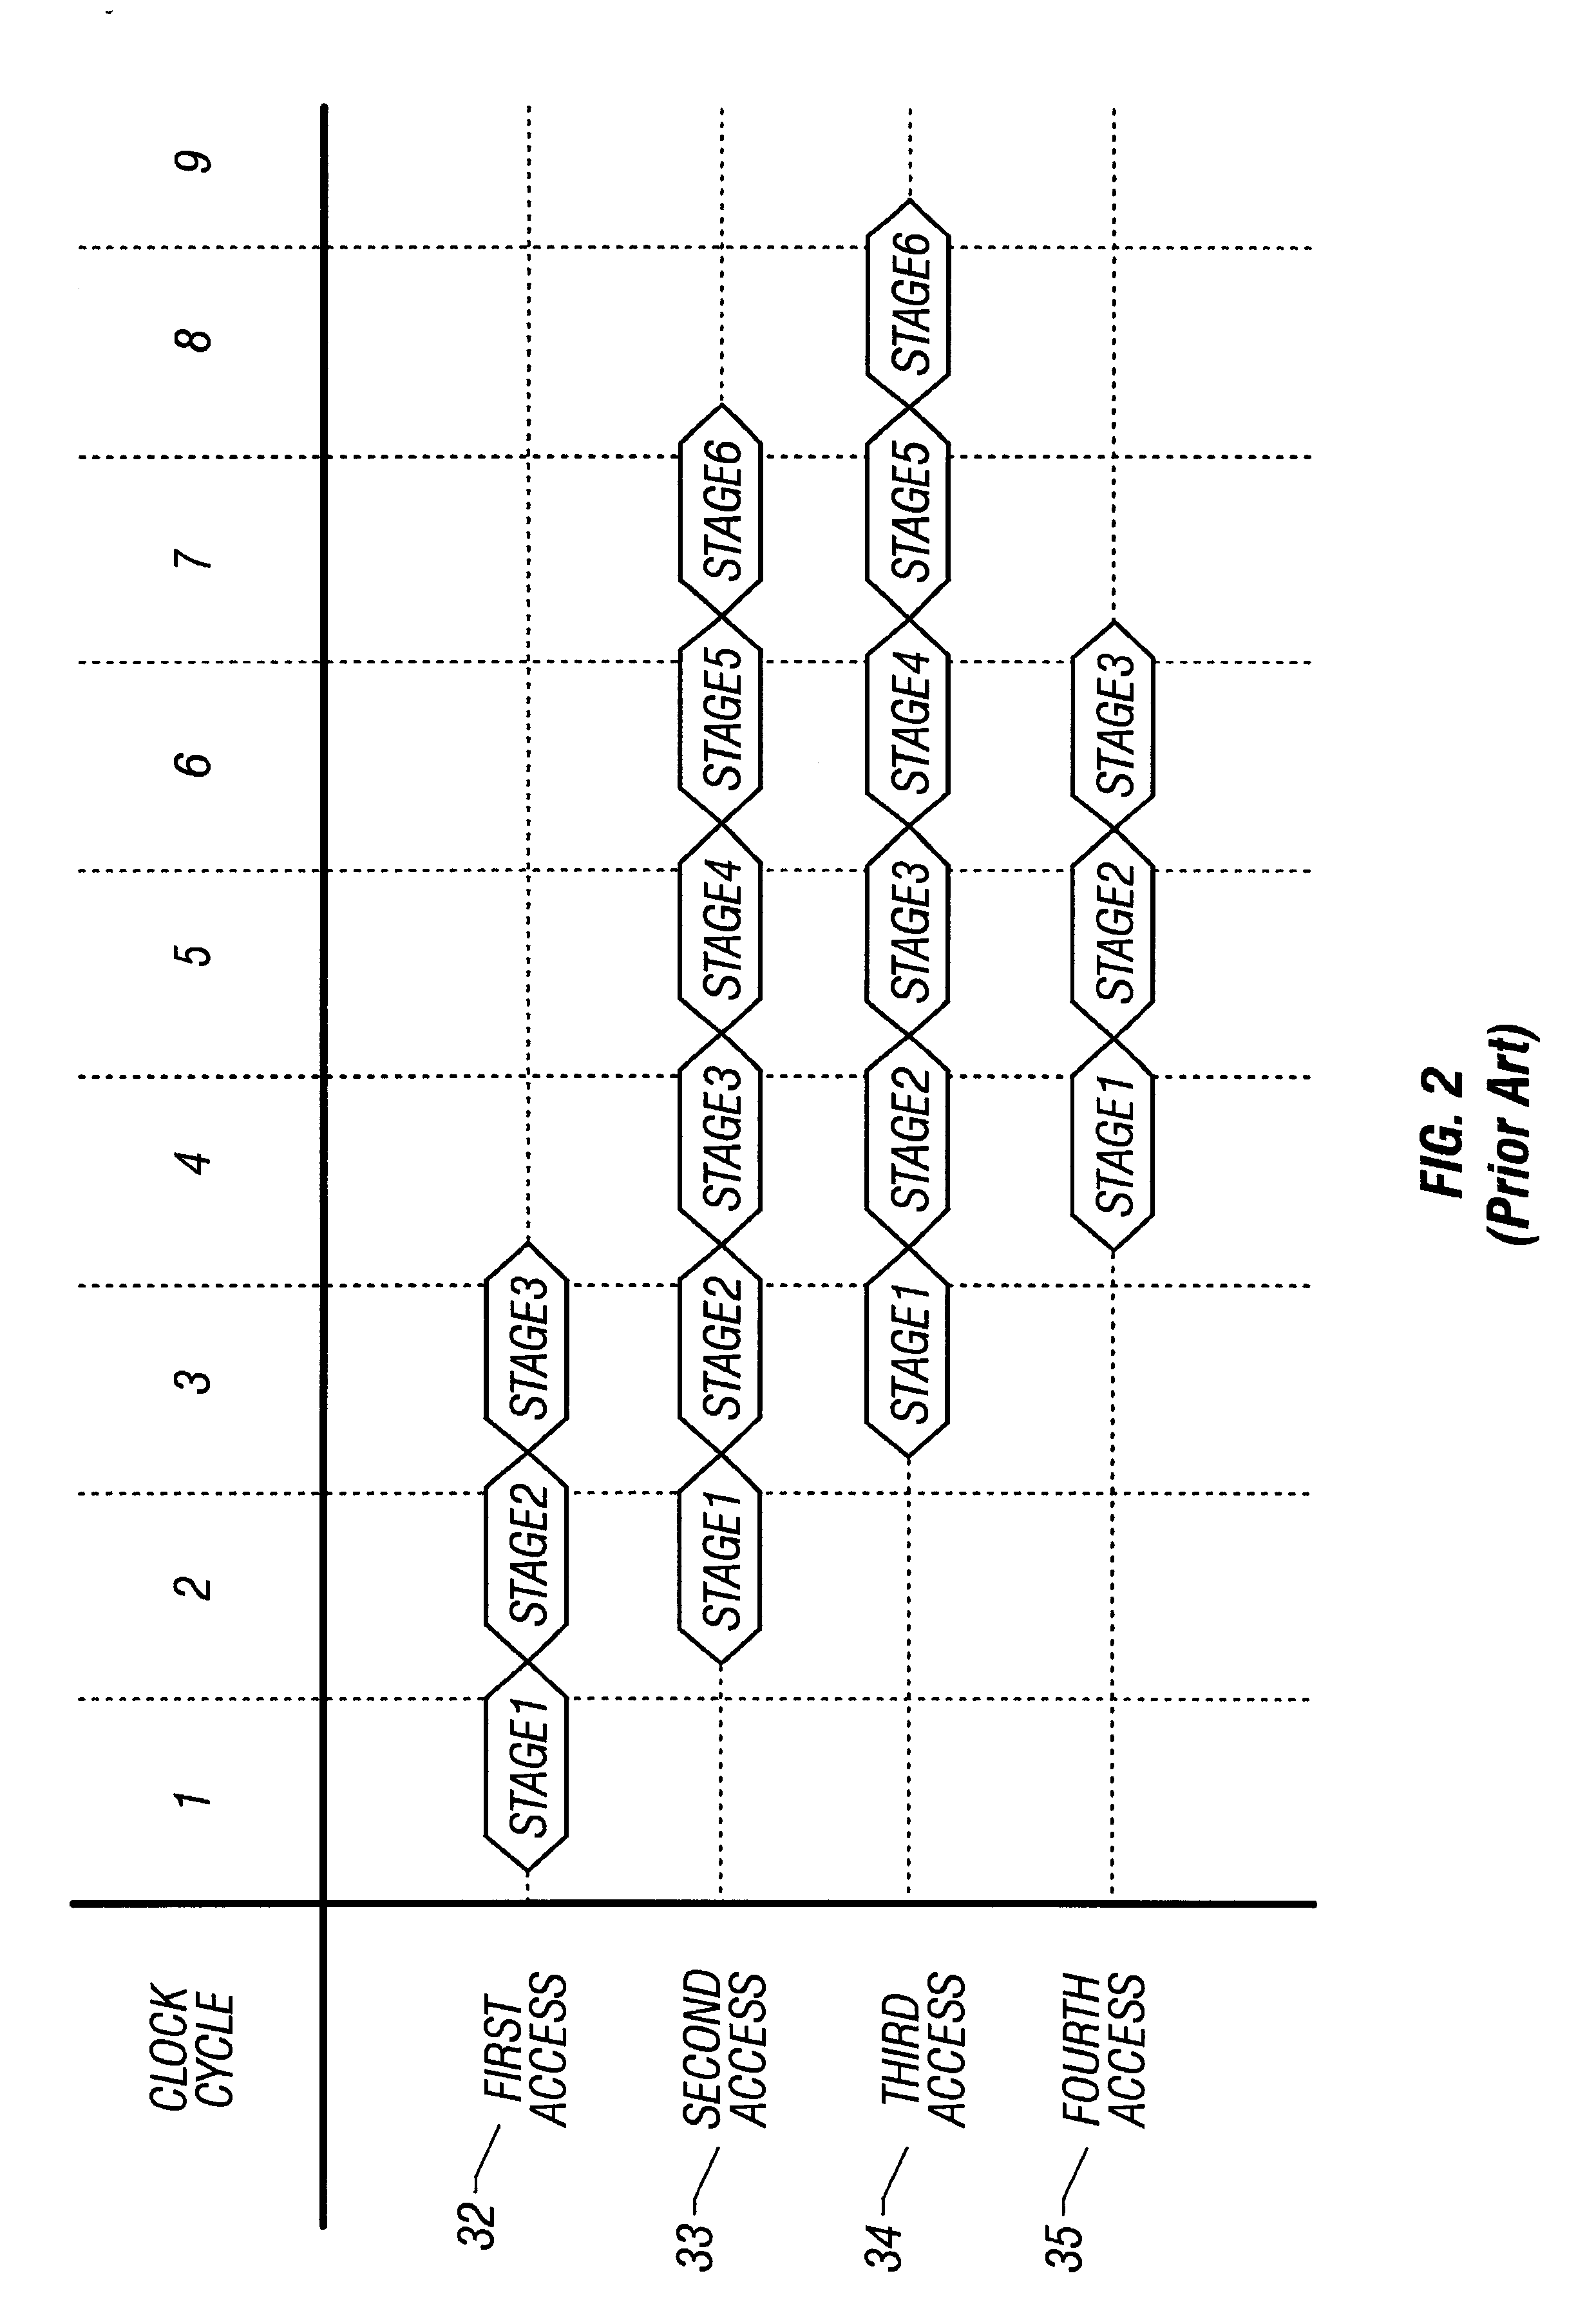 Cache memory architecture with on-chip tag array and off-chip data array